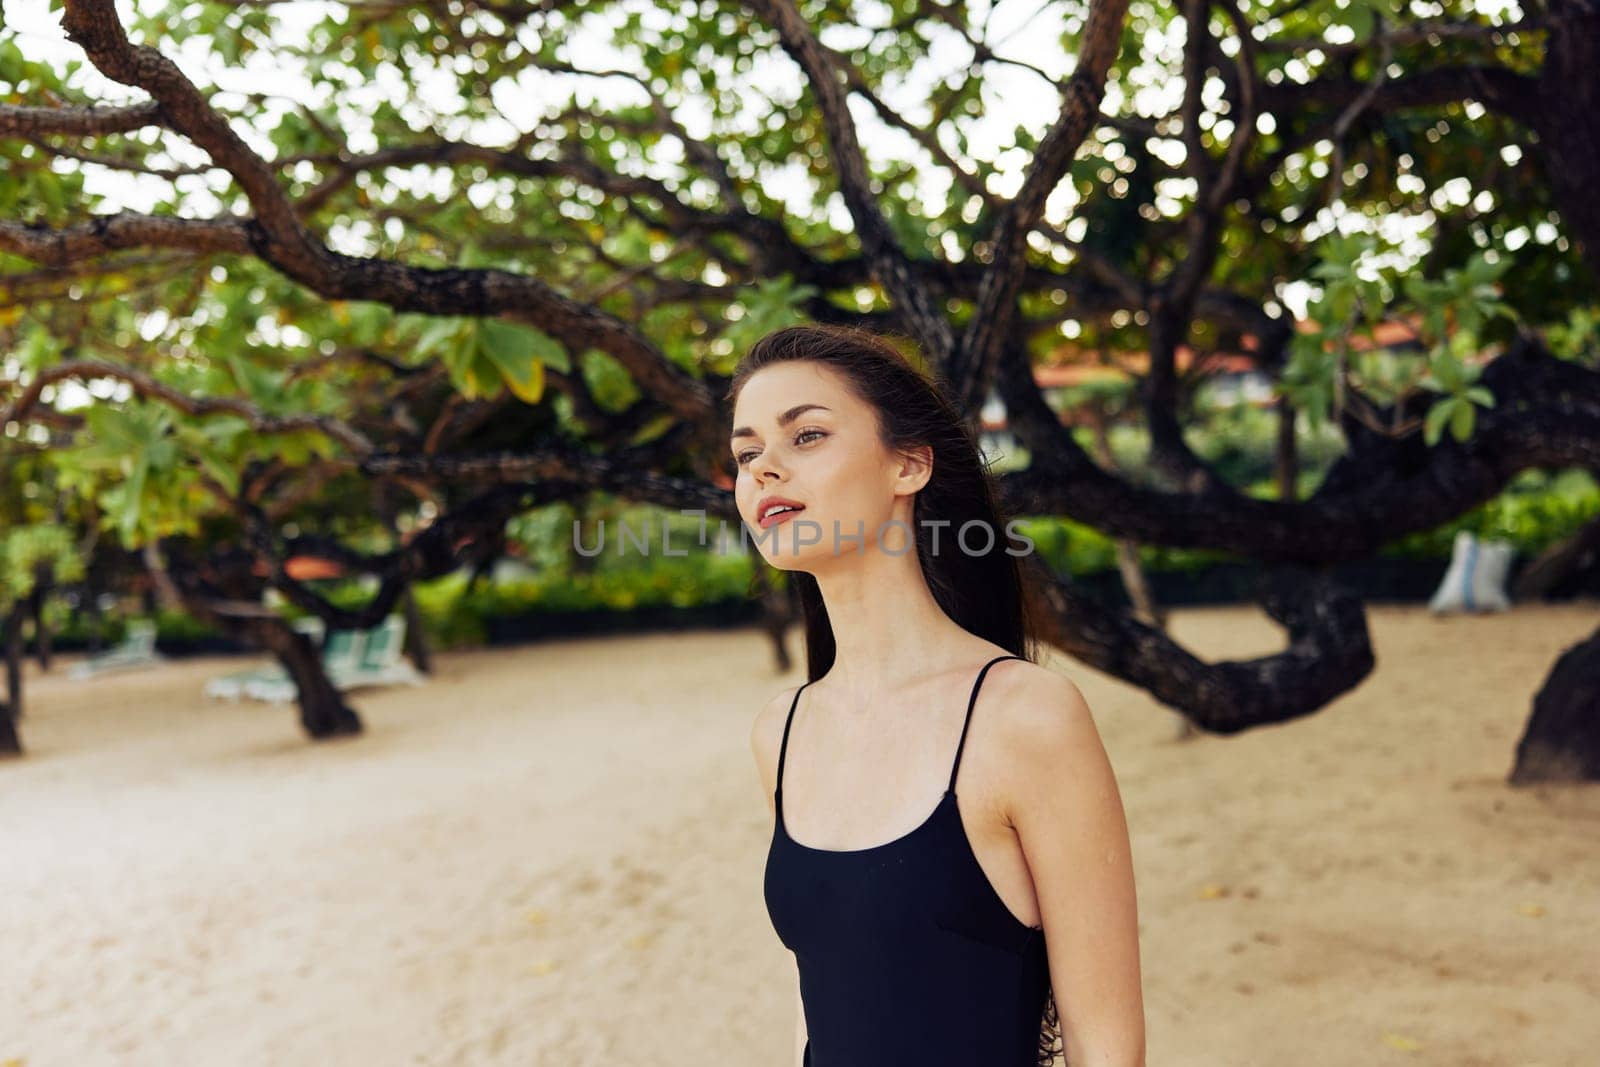 woman shore sand outdoor copy-space smiling sea vacation summer freedom relax copy space young person ocean sun smile walking nature beach caucasian